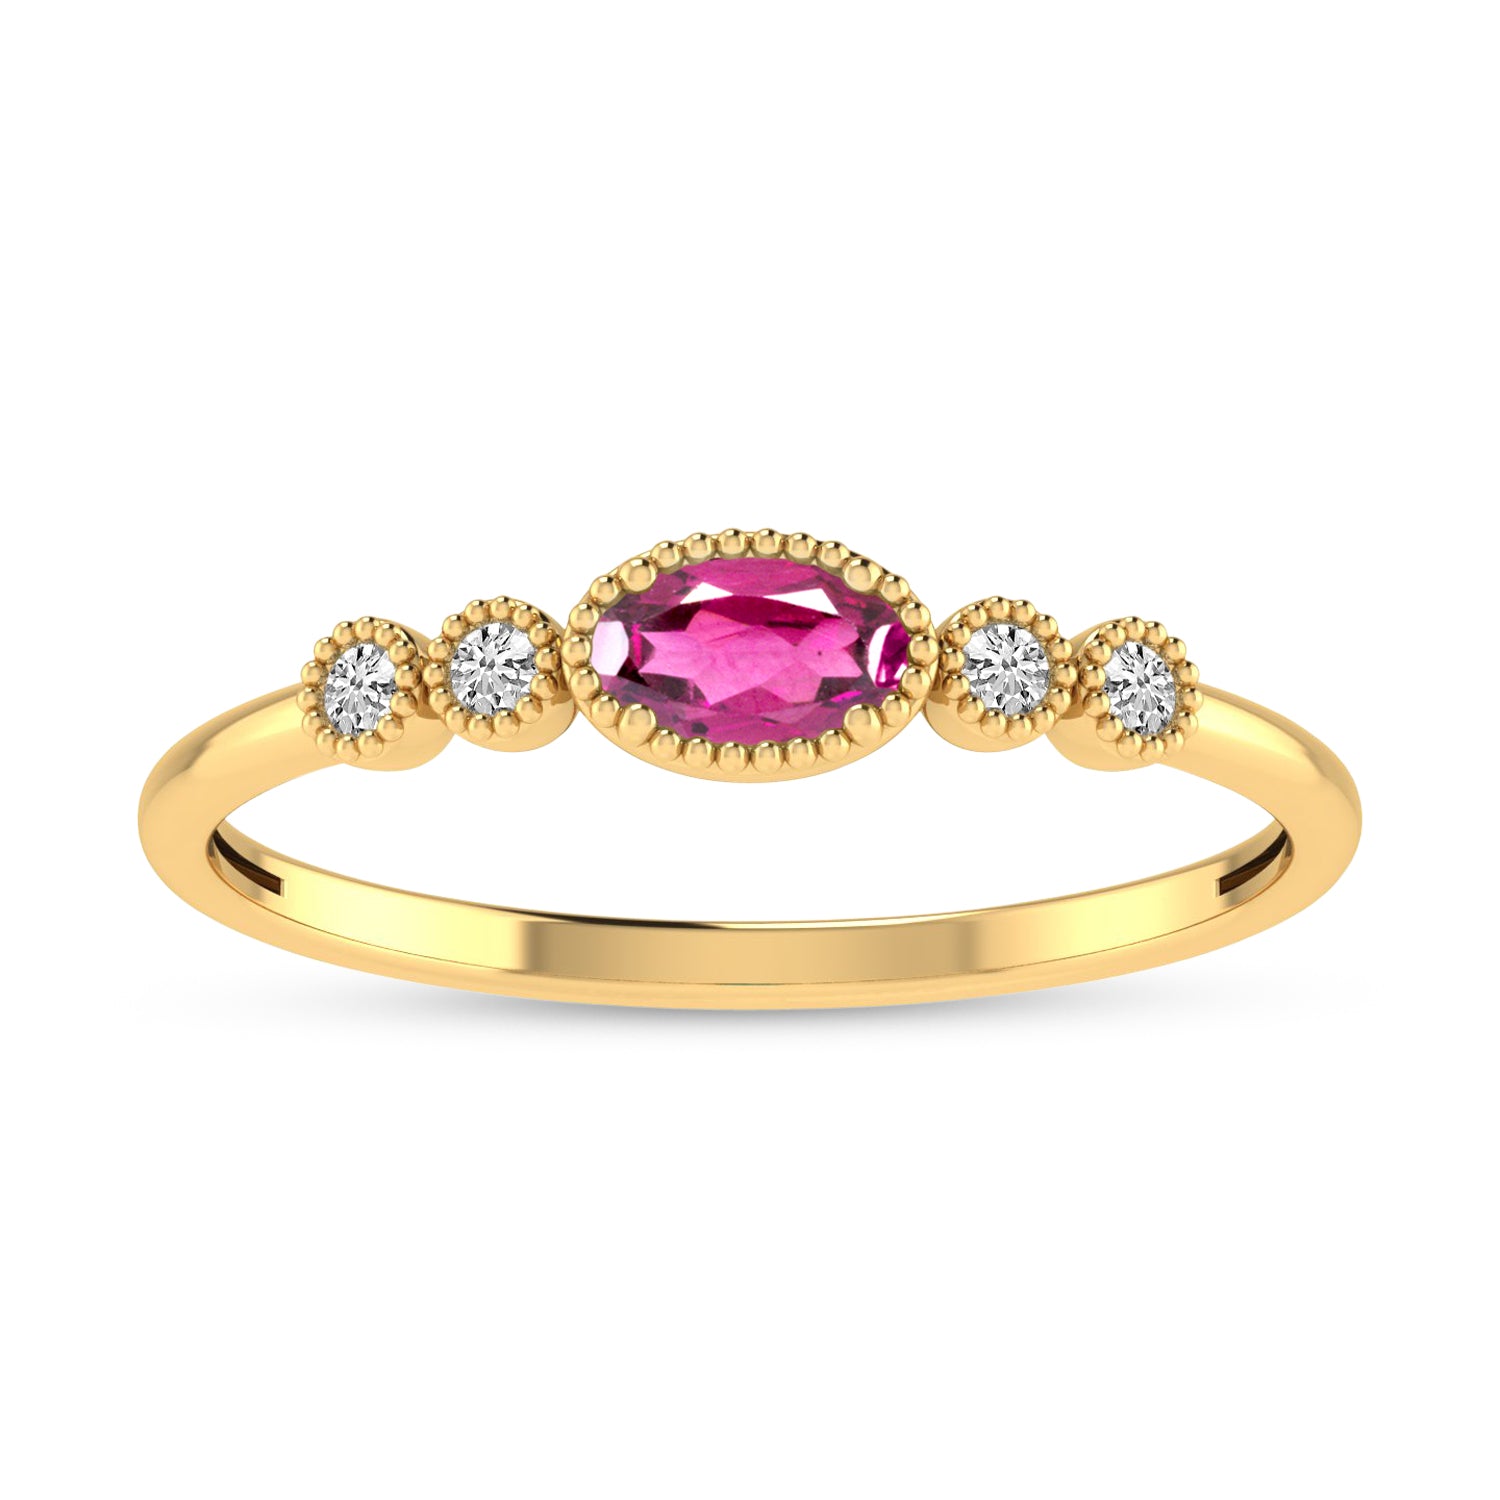 14K Yellow Gold Oval Pink Tourmaline and Diamond Stackable Ring RM4307X-JUN